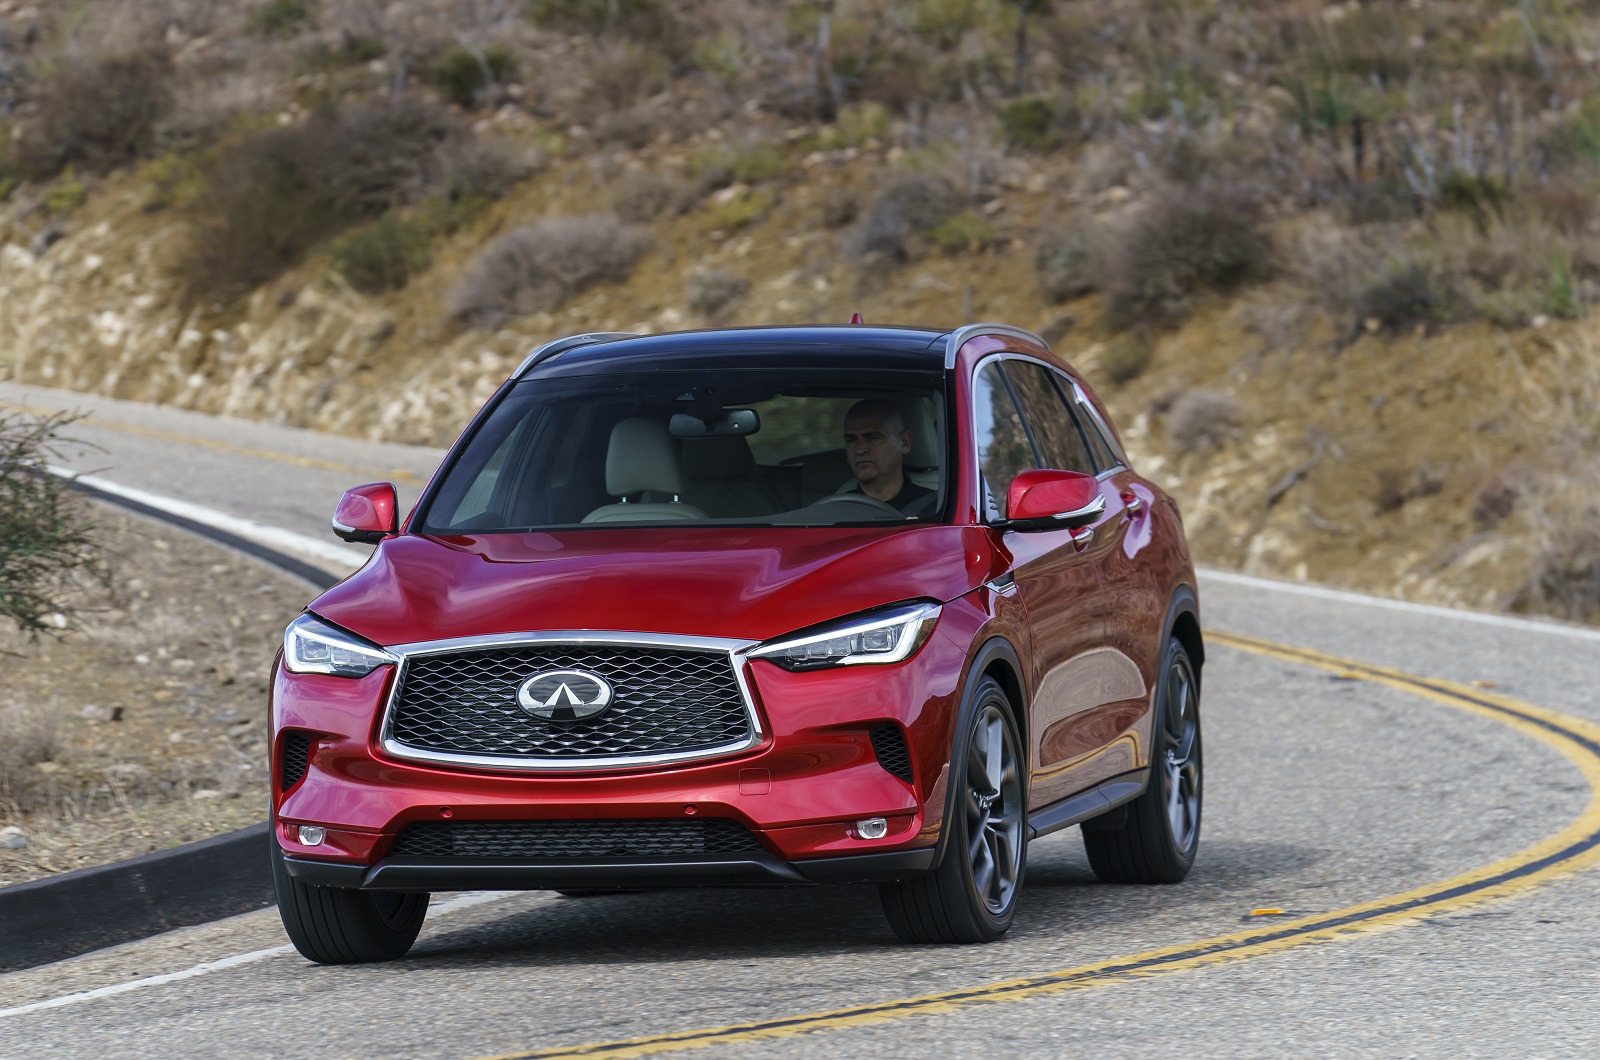 <p><strong>Infiniti</strong> introduced the second-generation <strong>QX50</strong> on the eve of the 2017 Los Angeles auto show. Though it looks like yet another SUV from the outside, its sheet metal hides a trick piece of tech. It’s the first car available with a variable-compression ratio engine.</p><p>Variable compression technology and downsizing help the 268hp VC-Turbo engine return markedly better fuel economy than its V6-powered predecessor without completely neutering its performance genes or adding the weight and complexity of a hybrid powertrain. America's Environmental Protection Agency (EPA) reckons the new SUV is 35% more economical than the 2018 V6 QX50.</p><p><strong>GROUNDBREAKER SCORE: </strong>Too early to say</p>